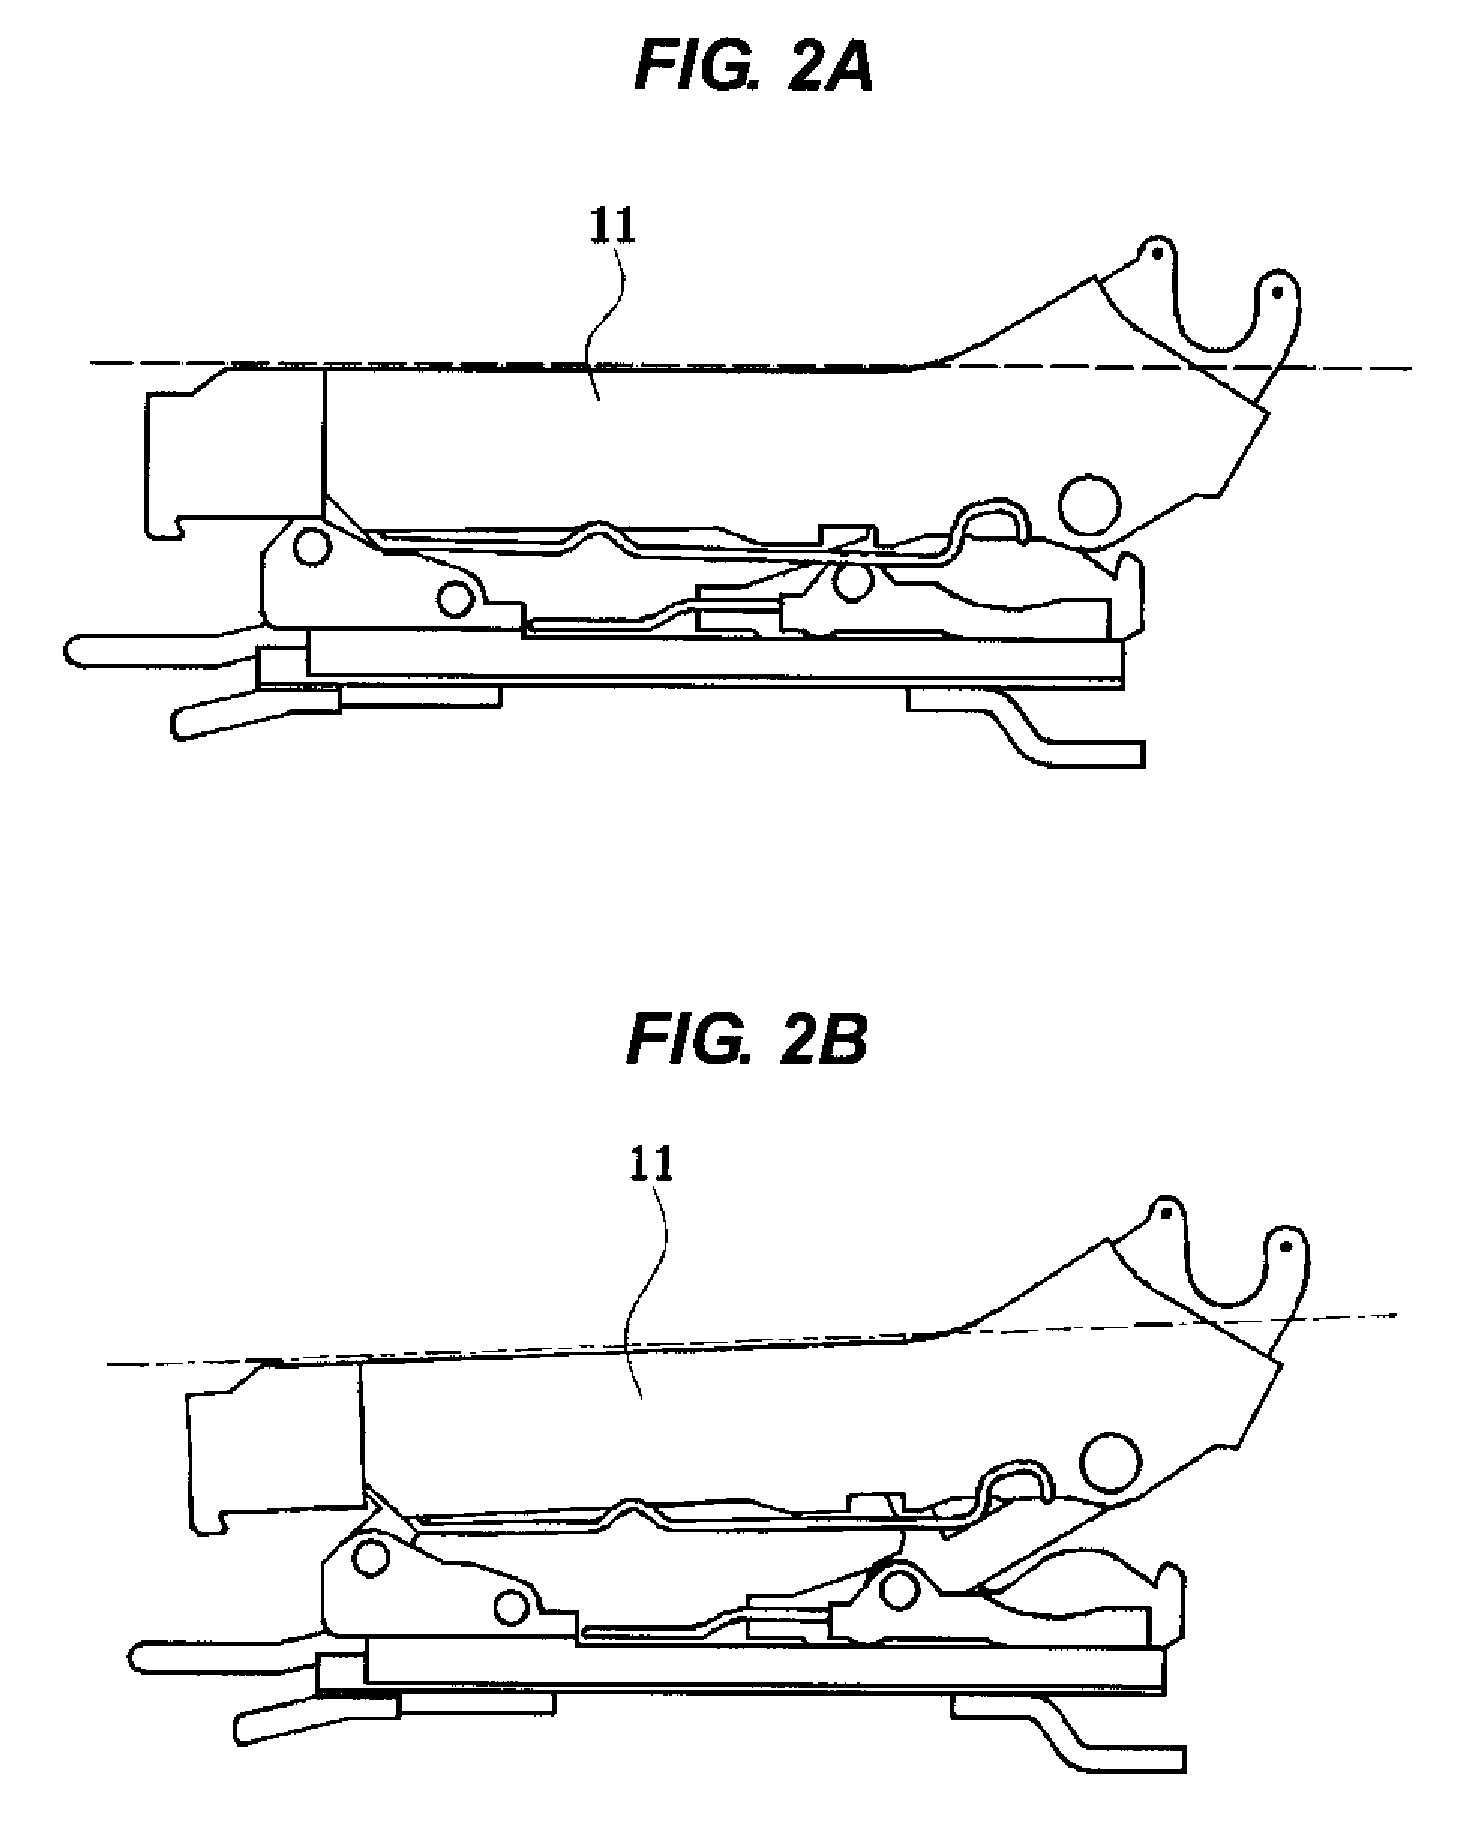 Apparatus for tilting vehicle seat cushion